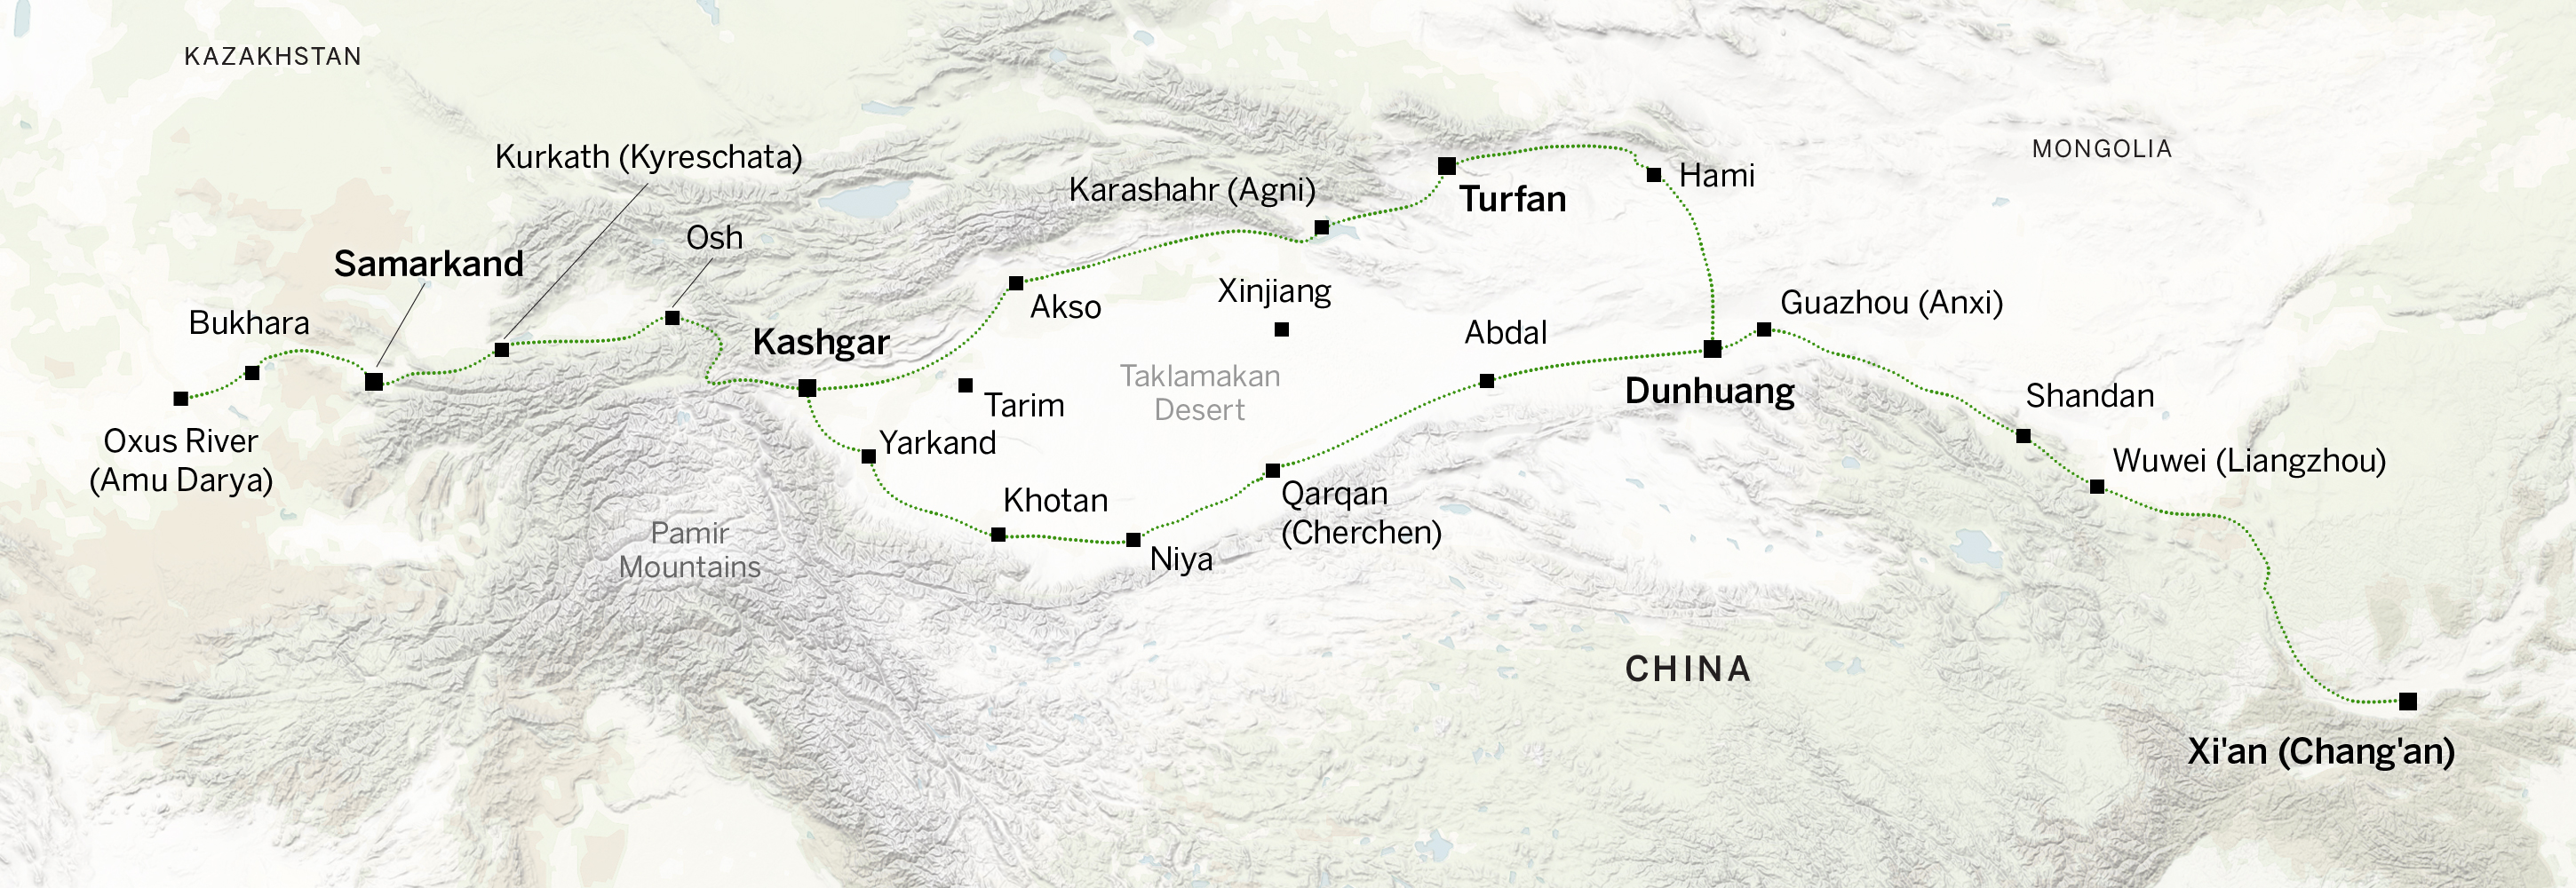 Many trade routes went around the Taklamakan Desert.